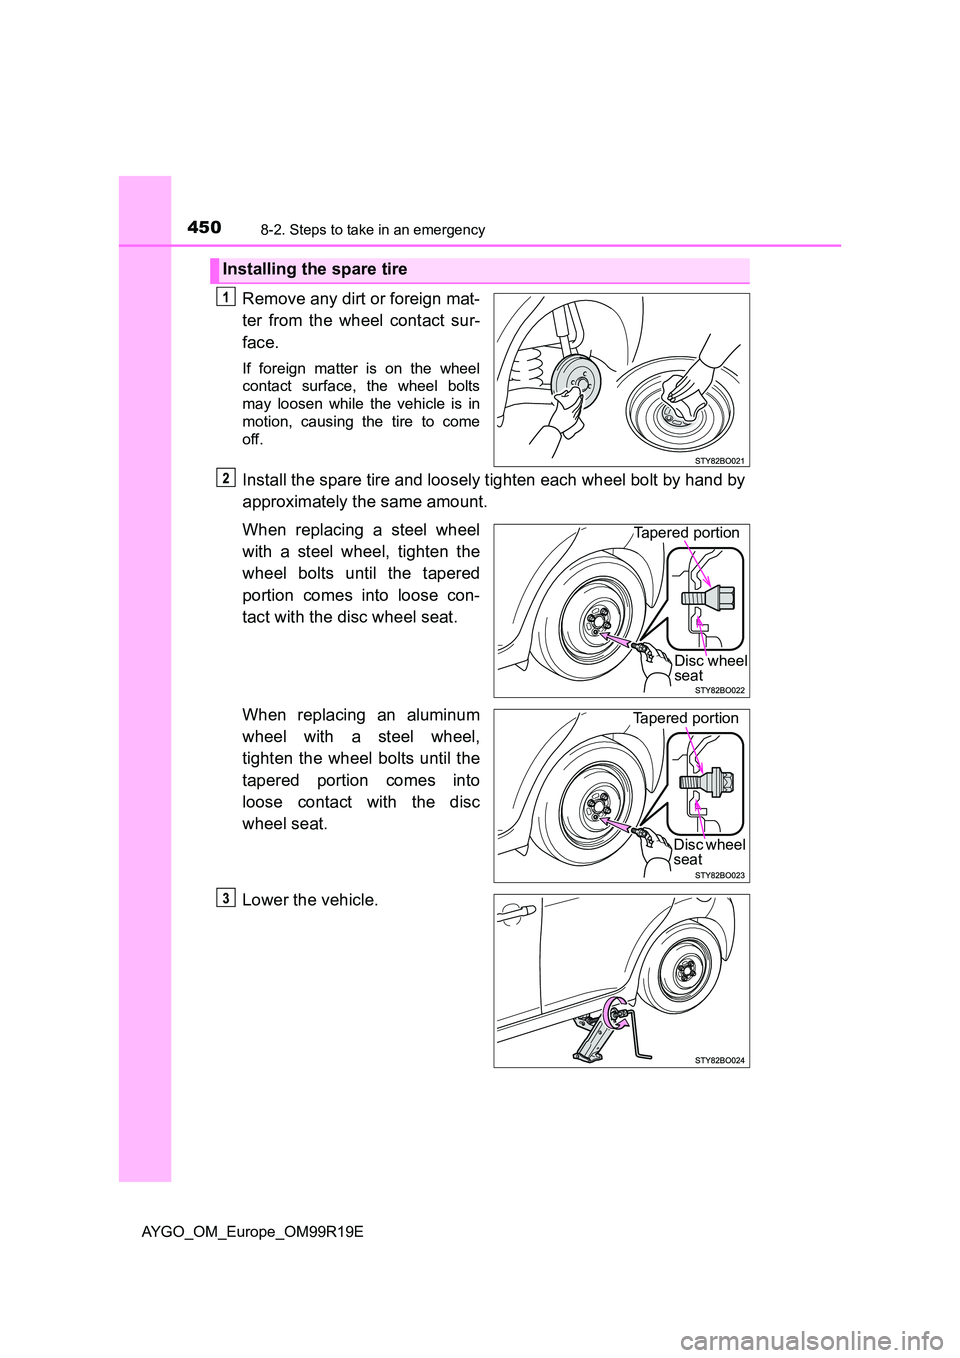 TOYOTA AYGO 2019  Owners Manual (in English) 4508-2. Steps to take in an emergency
AYGO_OM_Europe_OM99R19E
Remove any dirt or foreign mat- 
ter from the wheel contact sur- 
face.
If foreign matter is on the wheel 
contact surface, the wheel bolt